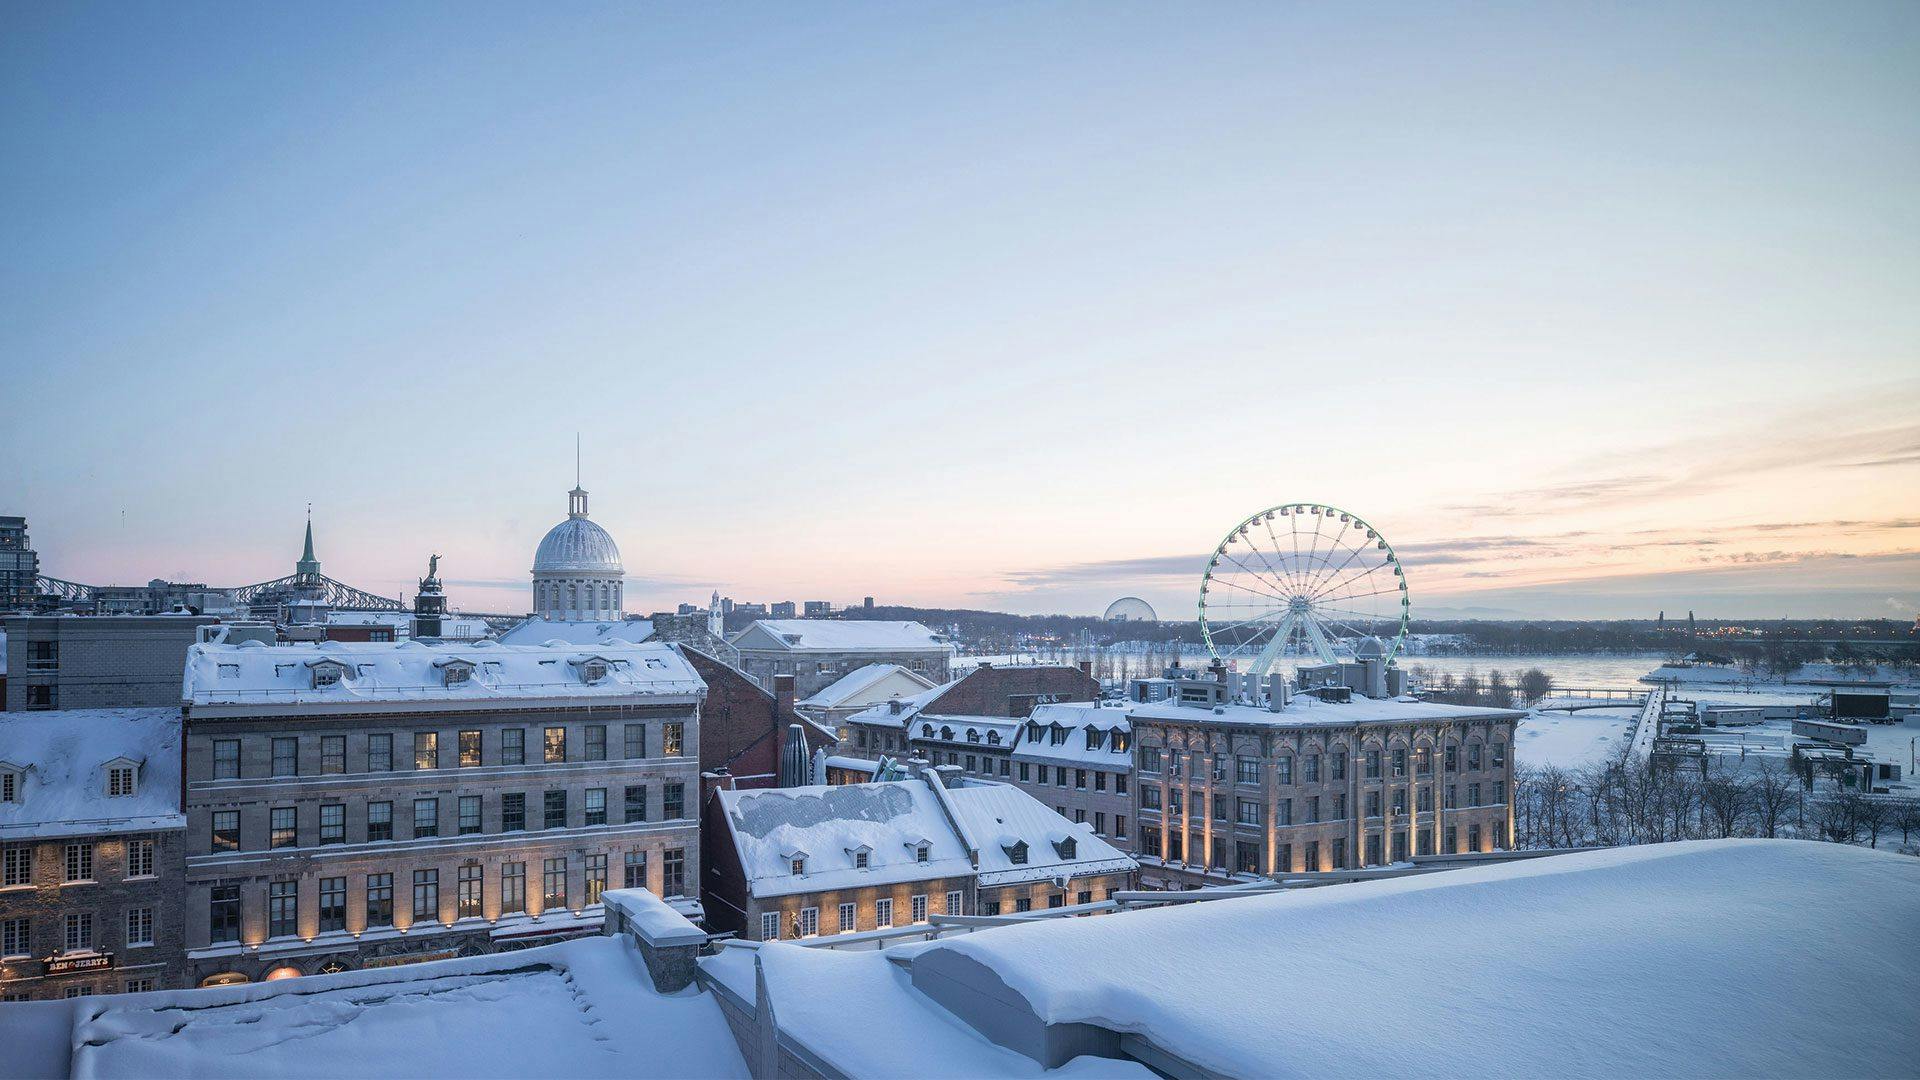 Old Montreal is one of Canada's most beautiful and historic locations. Enjoy massage and thermal therapy at the indoor Scandinave Spa Old Montreal.